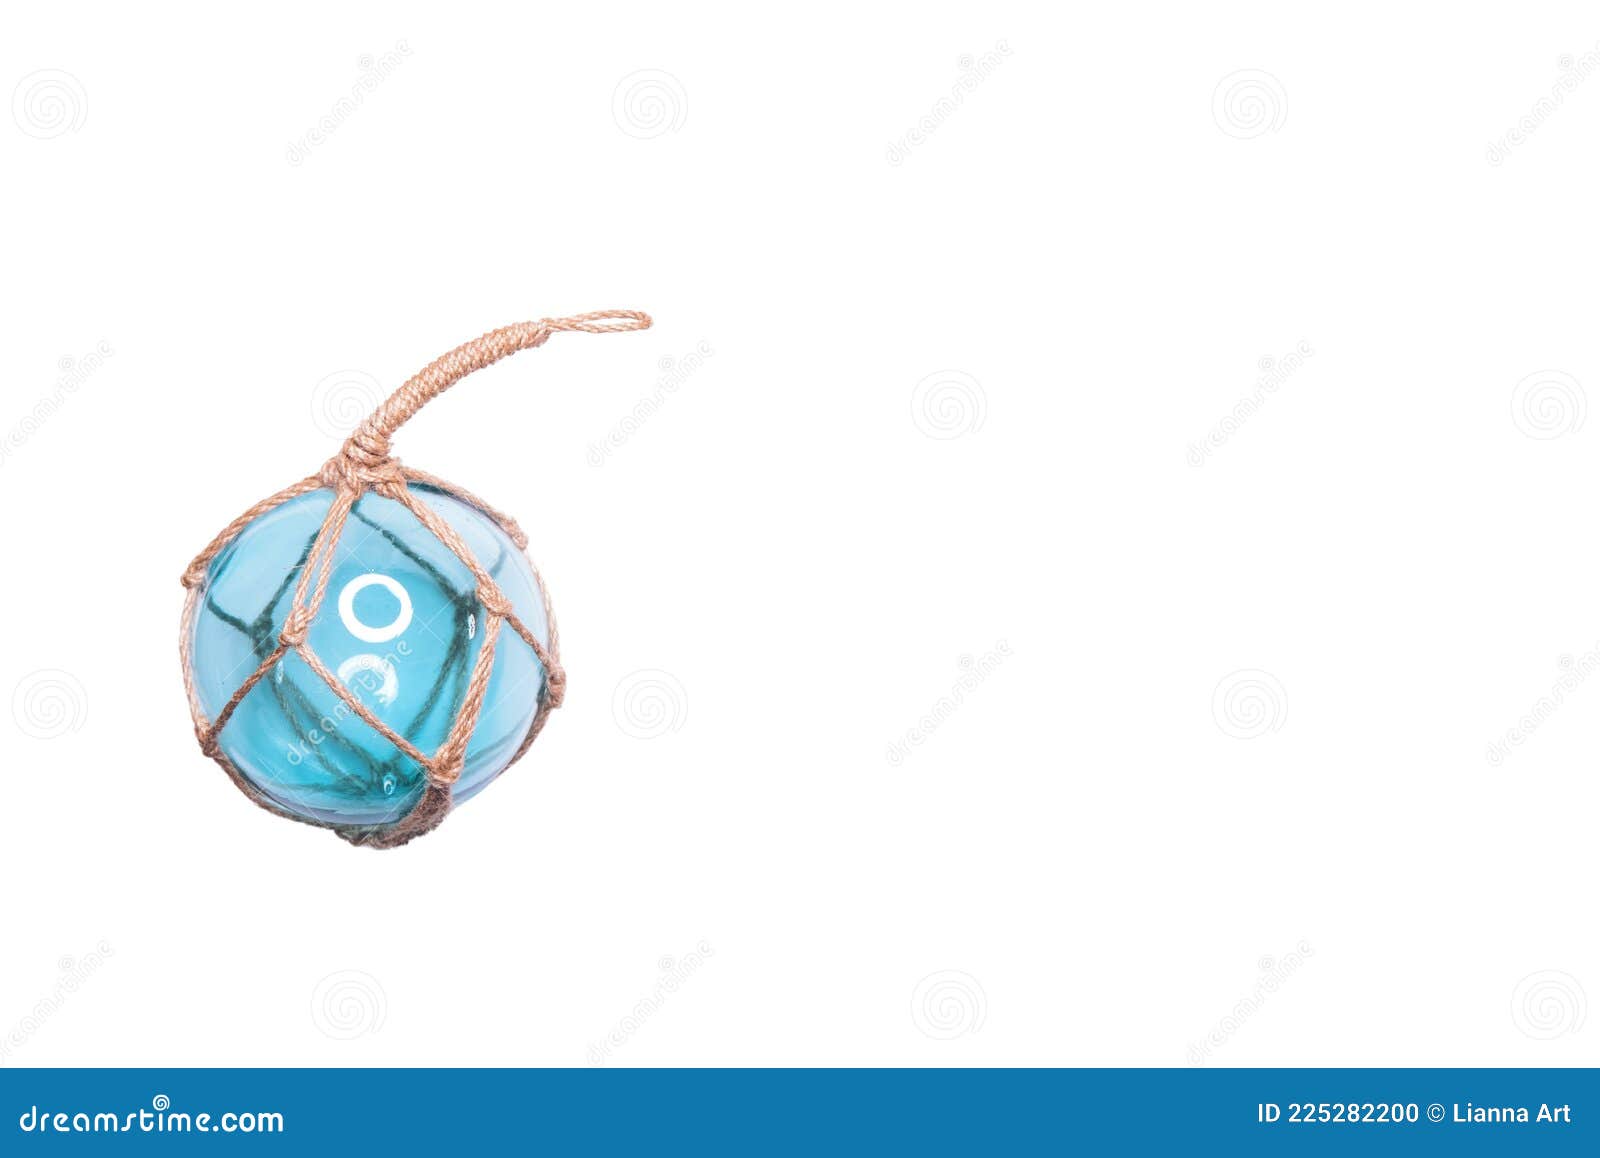 Glass Fishing Net Round Buoy. One Glass Sphere with Ropes Isolated